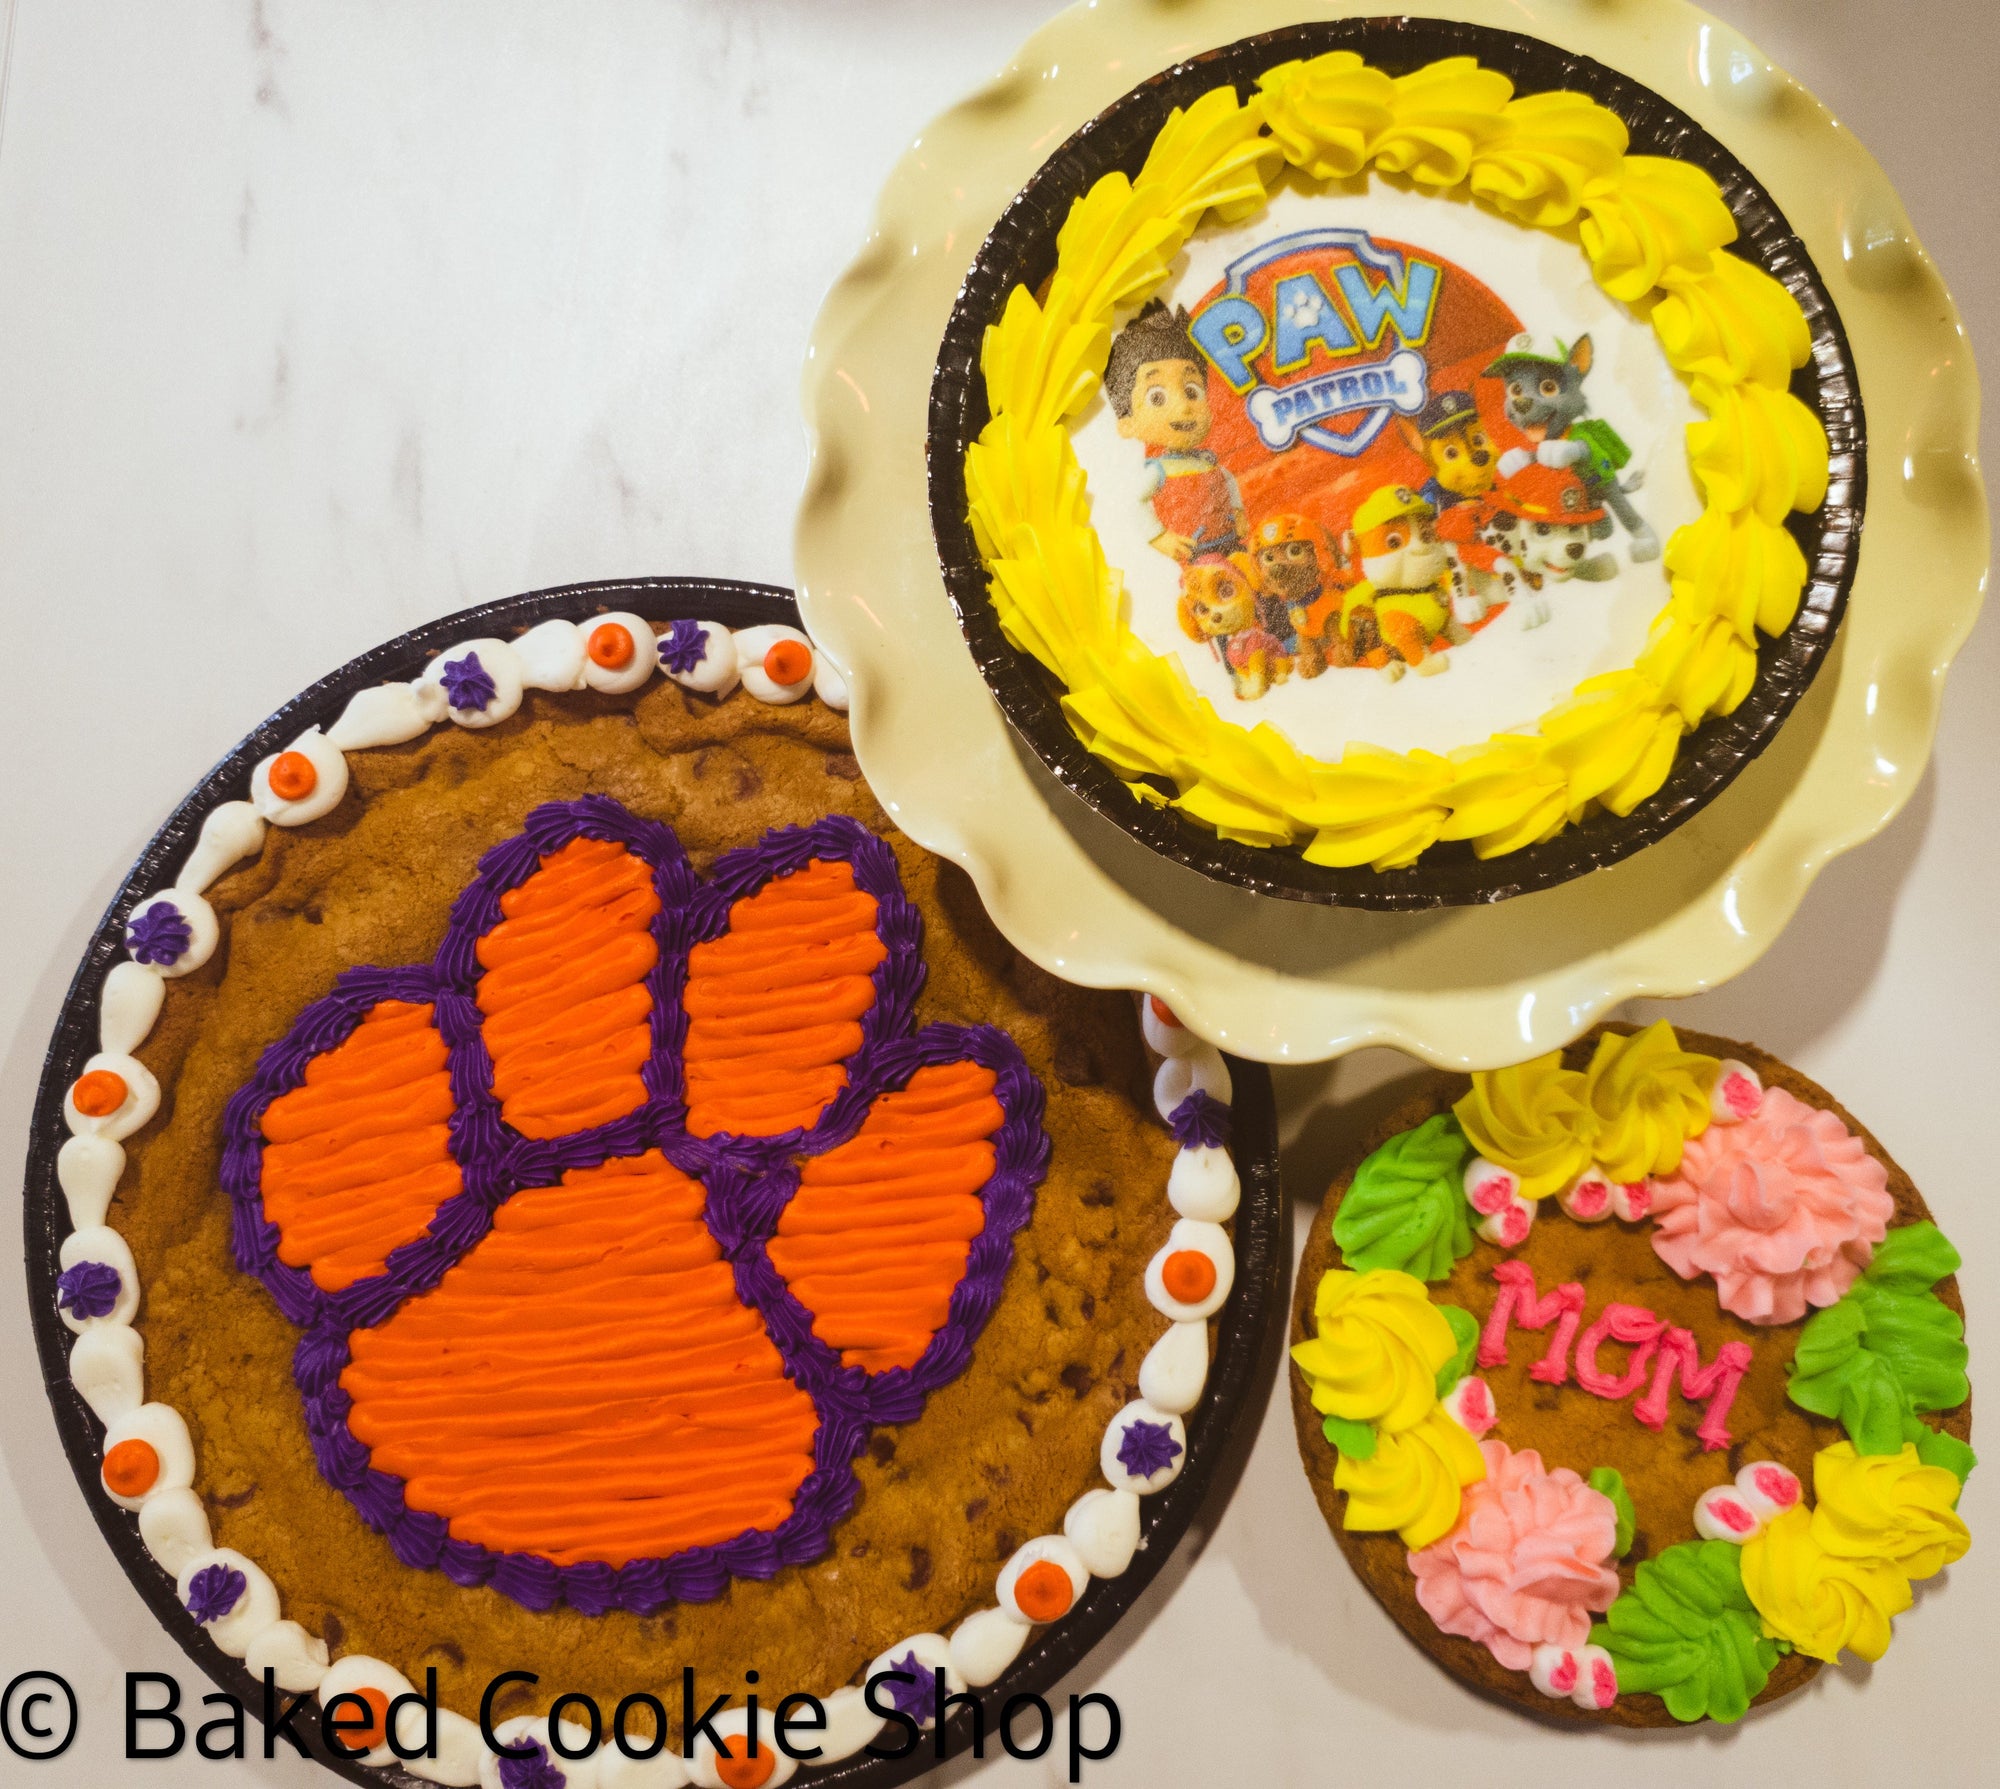 Deep Dish Cookie Cakes in Greenville SC | Baked Cookie Shop